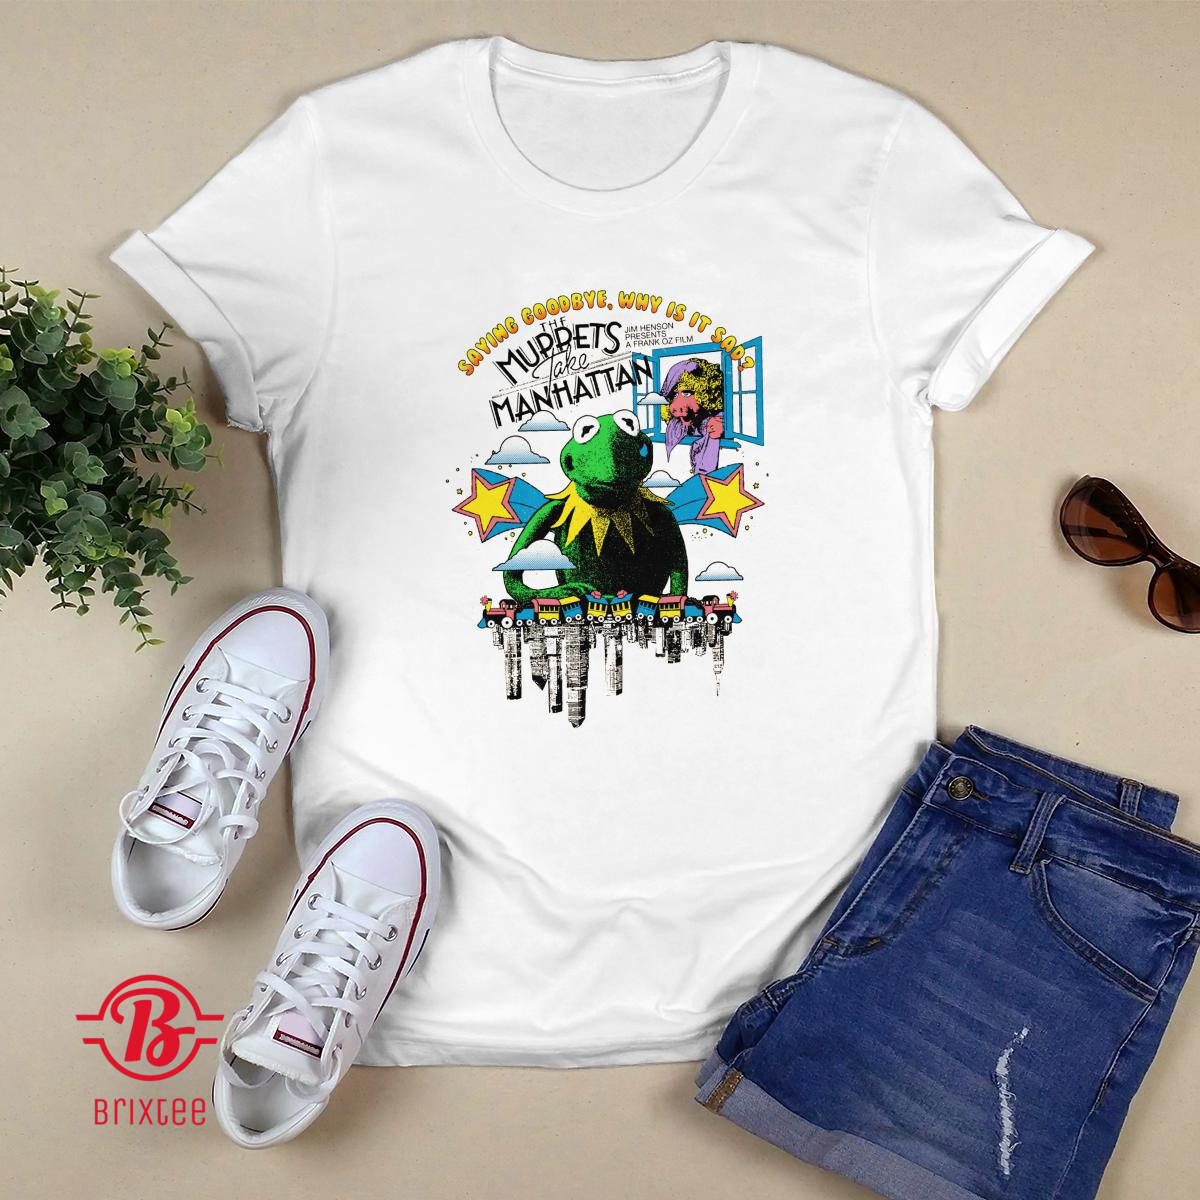 The Muppets Take Manhattan Saying Goodbye, Why Is It Sad? T-Shirt